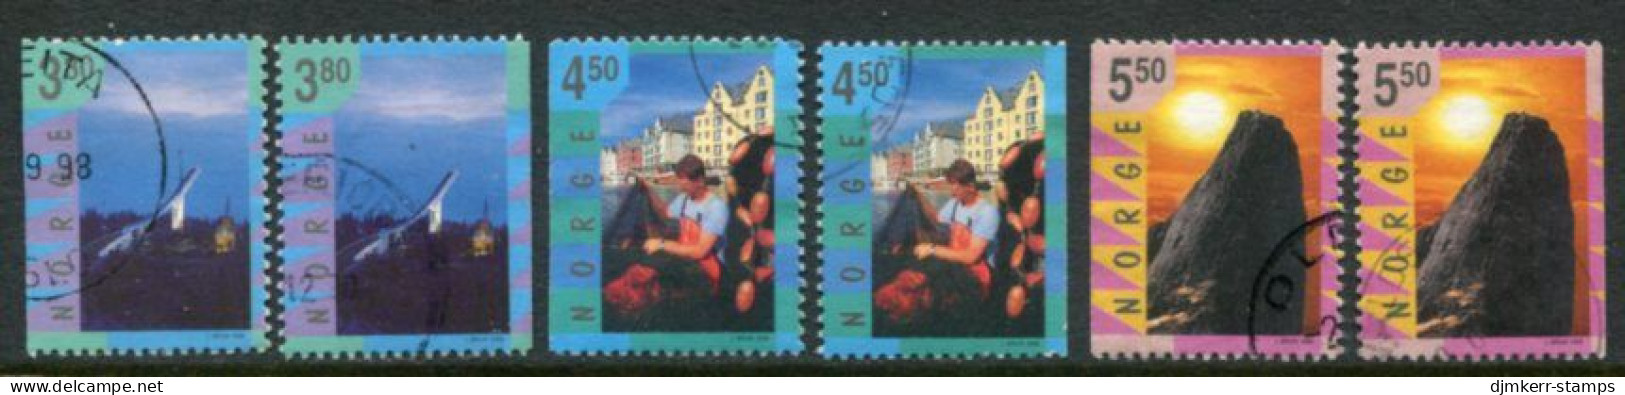 NORWAY 1998 Tourism Used.   Michel 1282-83 Dl-Dr - Used Stamps